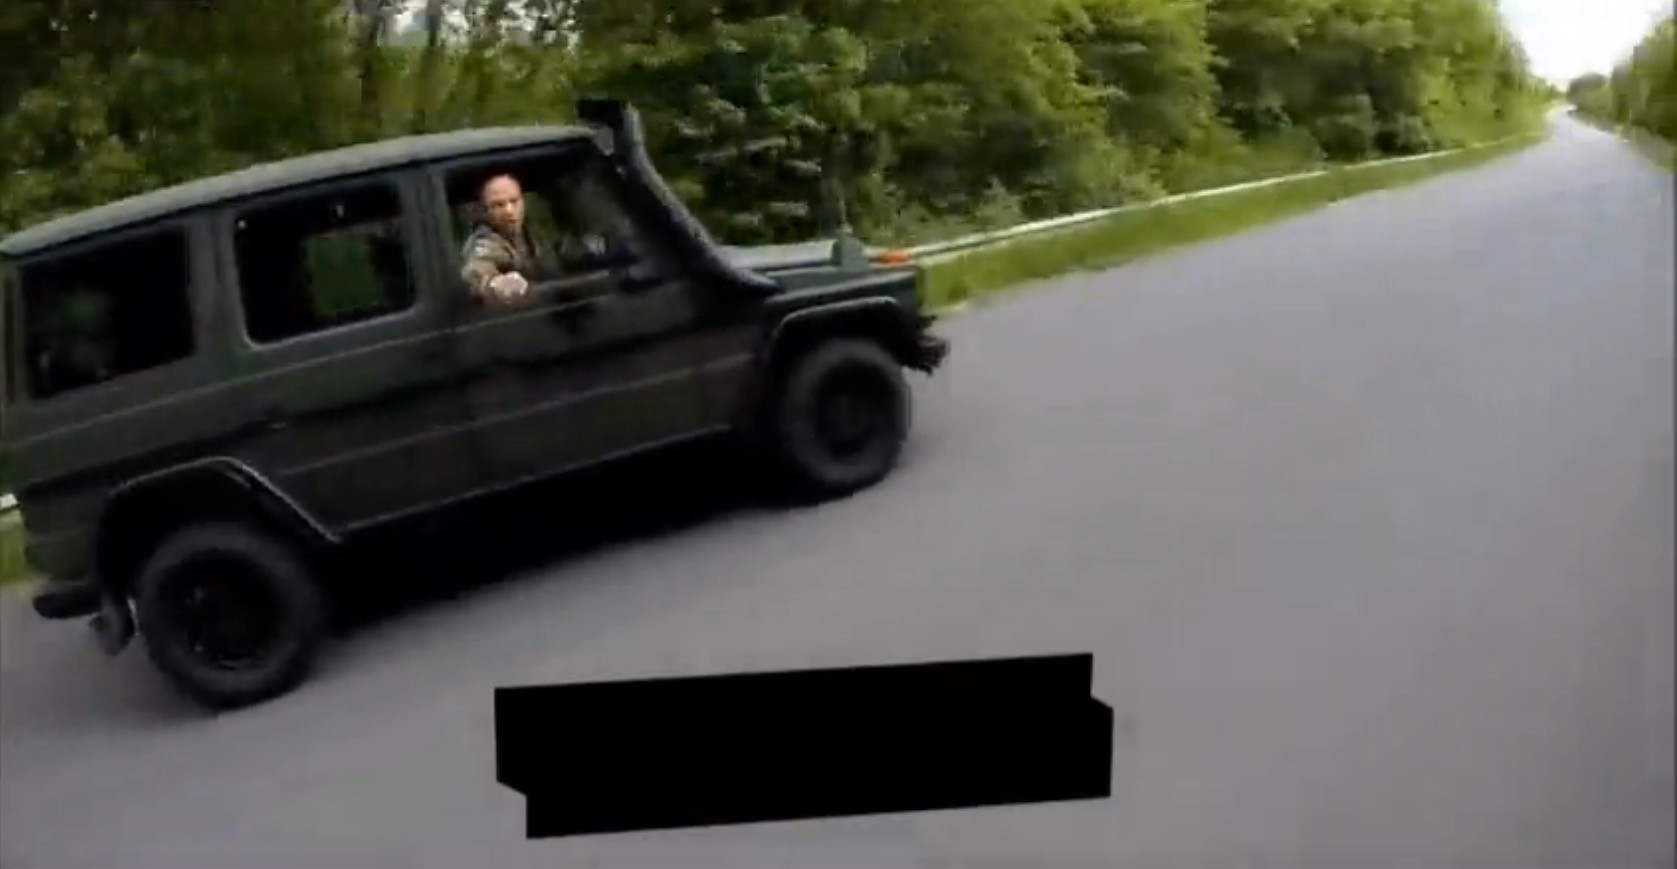 50cc-scooter-rider-chased-by-army-g-wagen-through-german-countryside_2